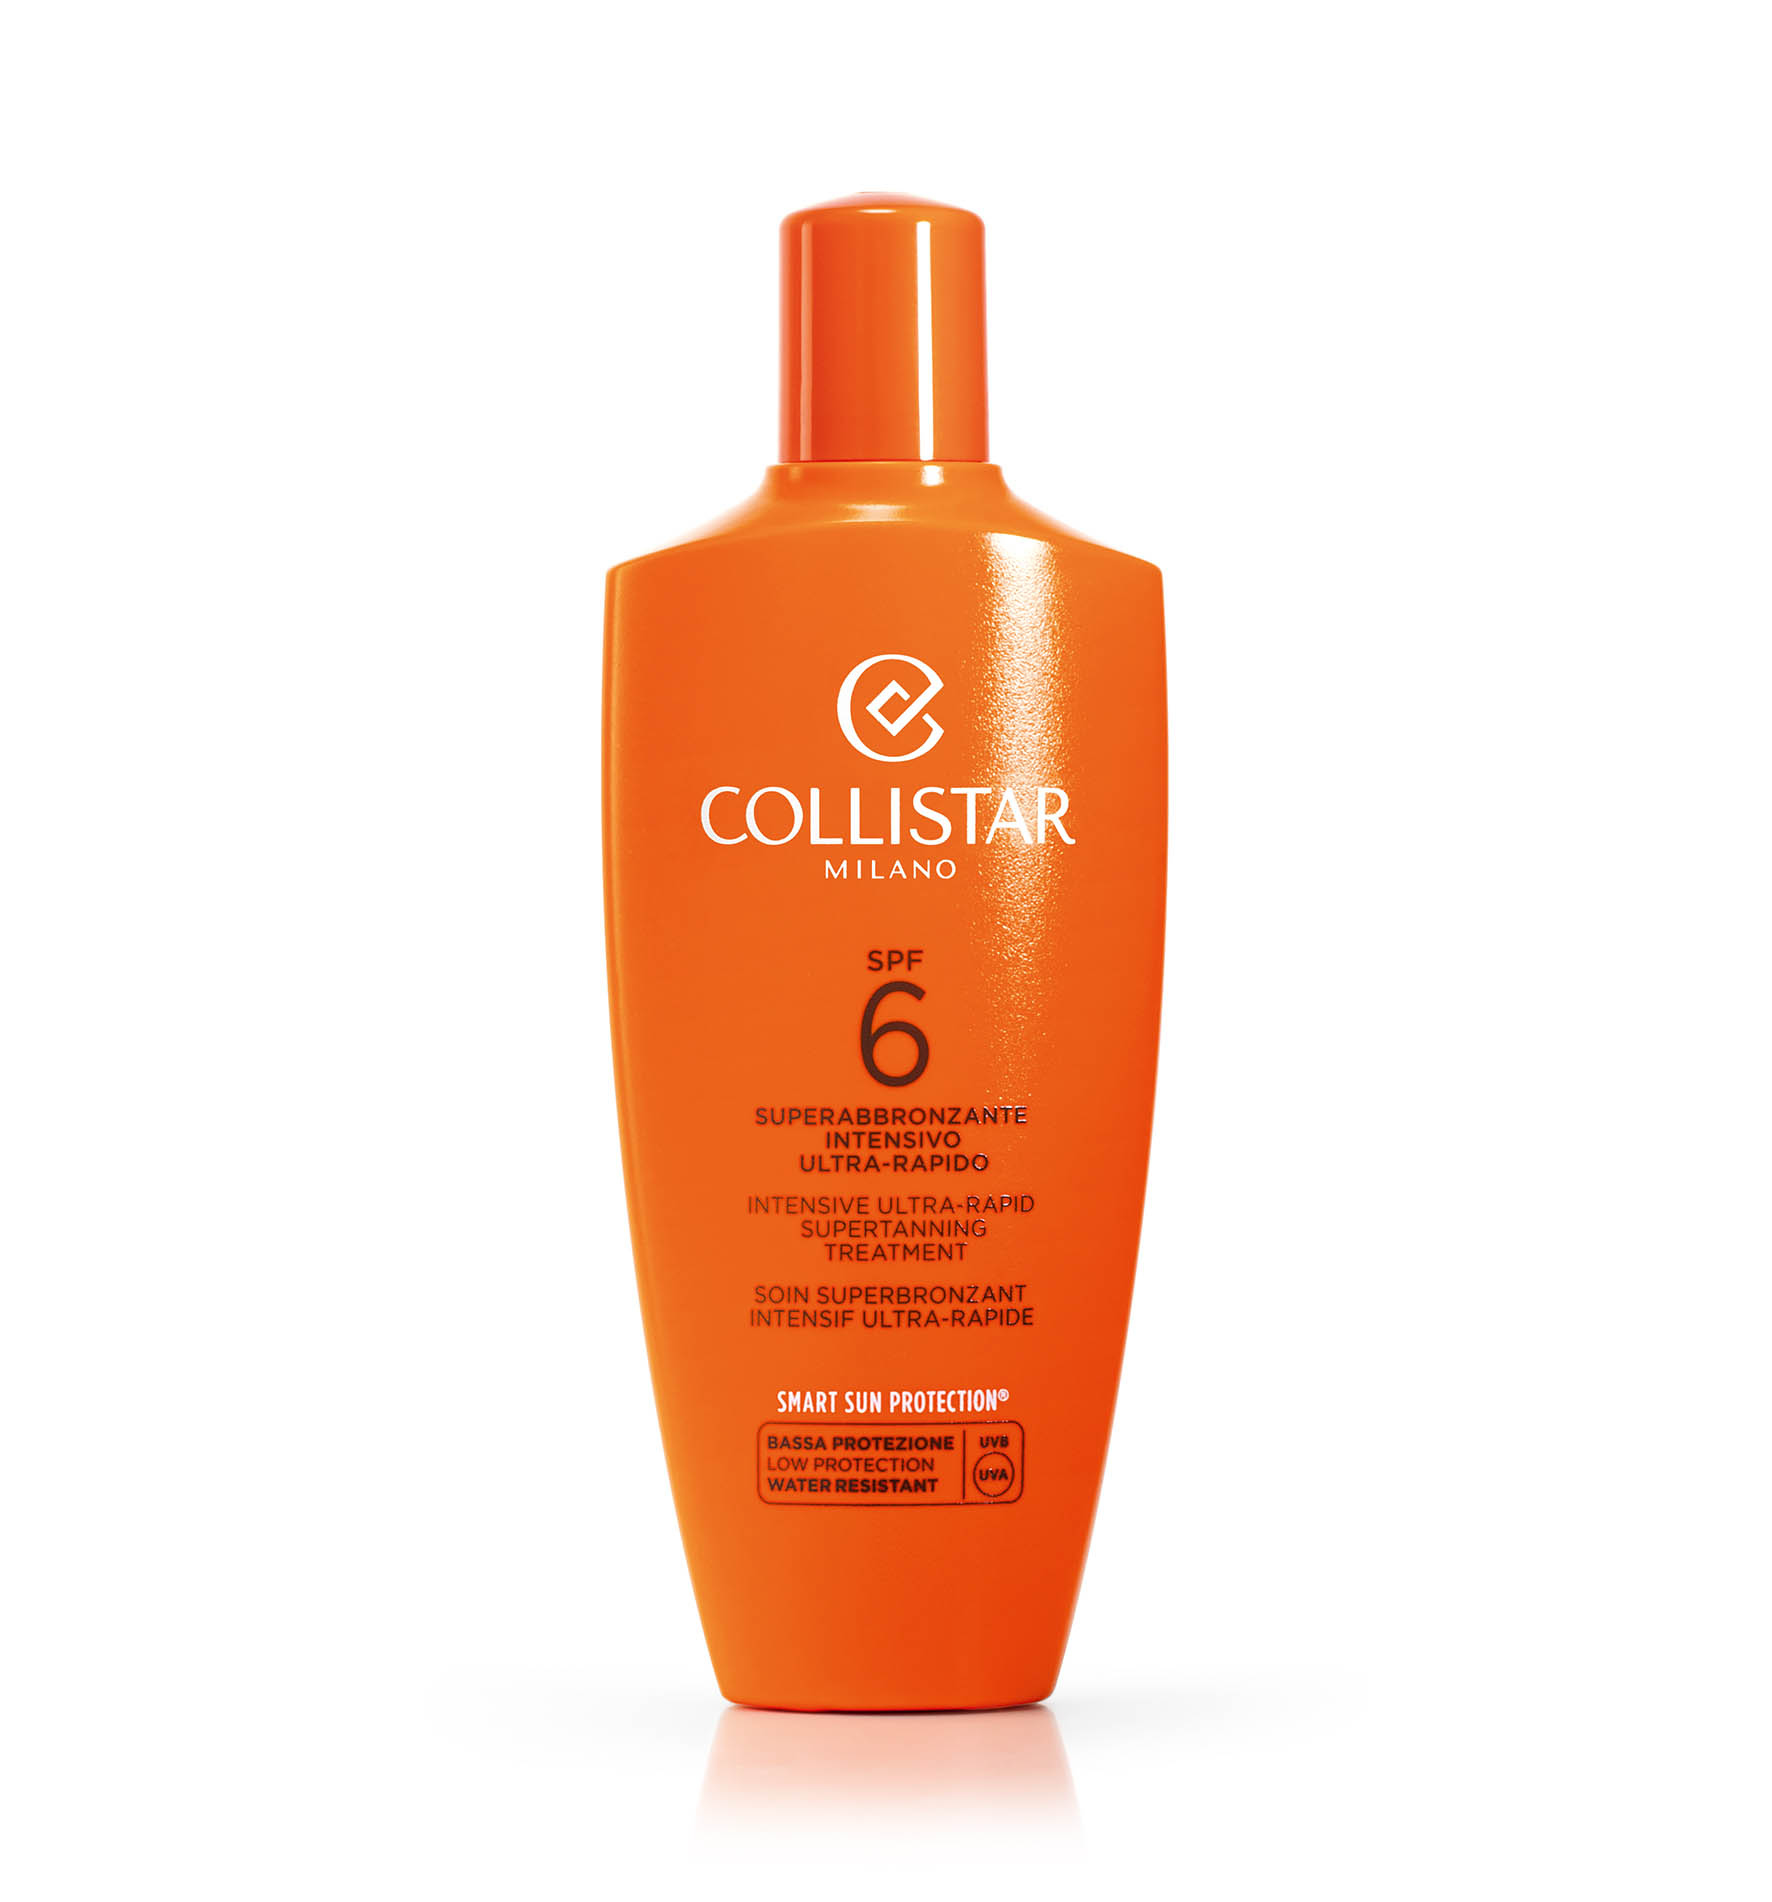 INTENSIVE ULTRA-RAPID SUPERTANNING TREATMENT SPF 6 - Low Protection SPF 6-10 | Collistar - Shop Online Ufficiale